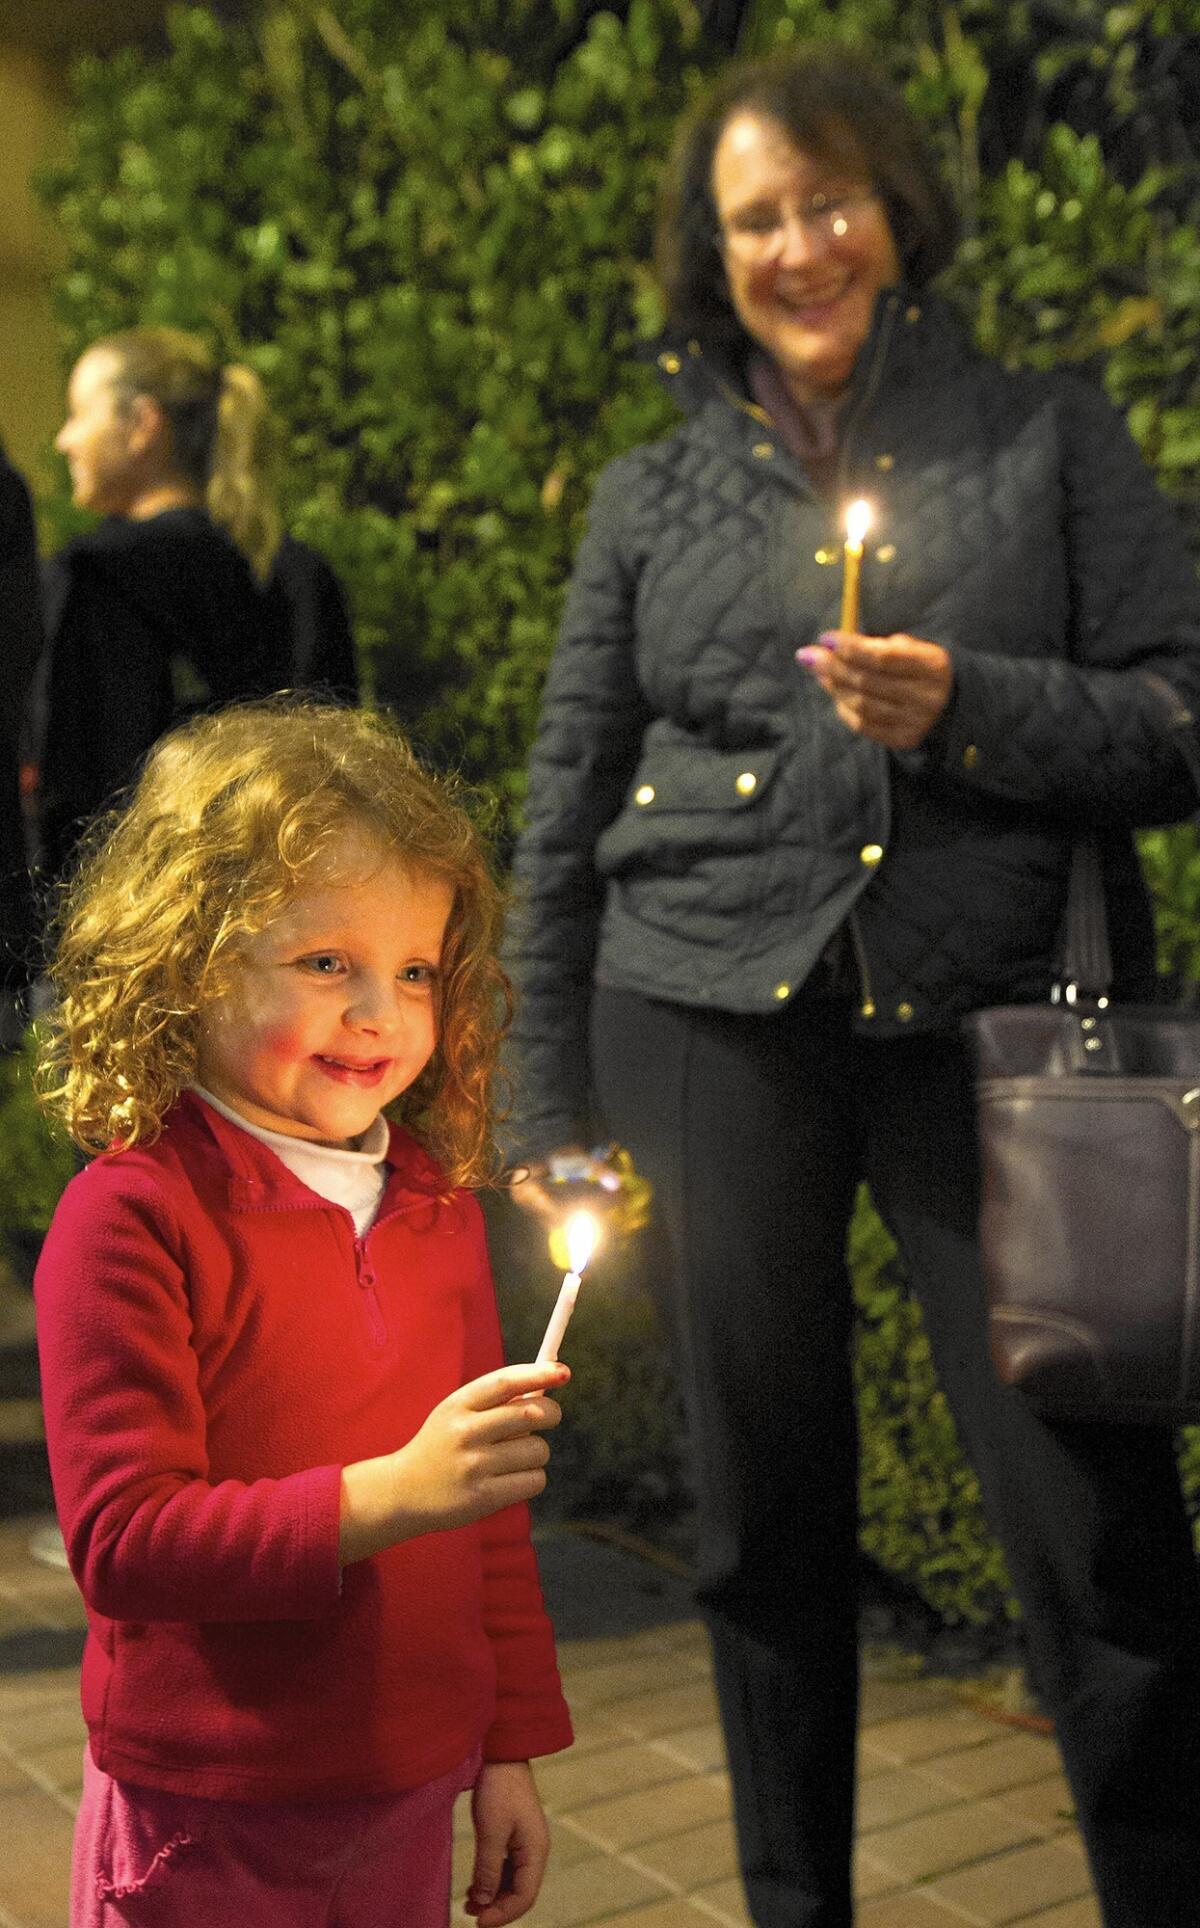 Brooklyn Marcus, left, and Sandra Chakmak hold candles during last year's public menorah lighting at Fashion Island in Newport Beach. This year's Hanukkah commemoration is Sunday at the mall's Atrium Garden Court.